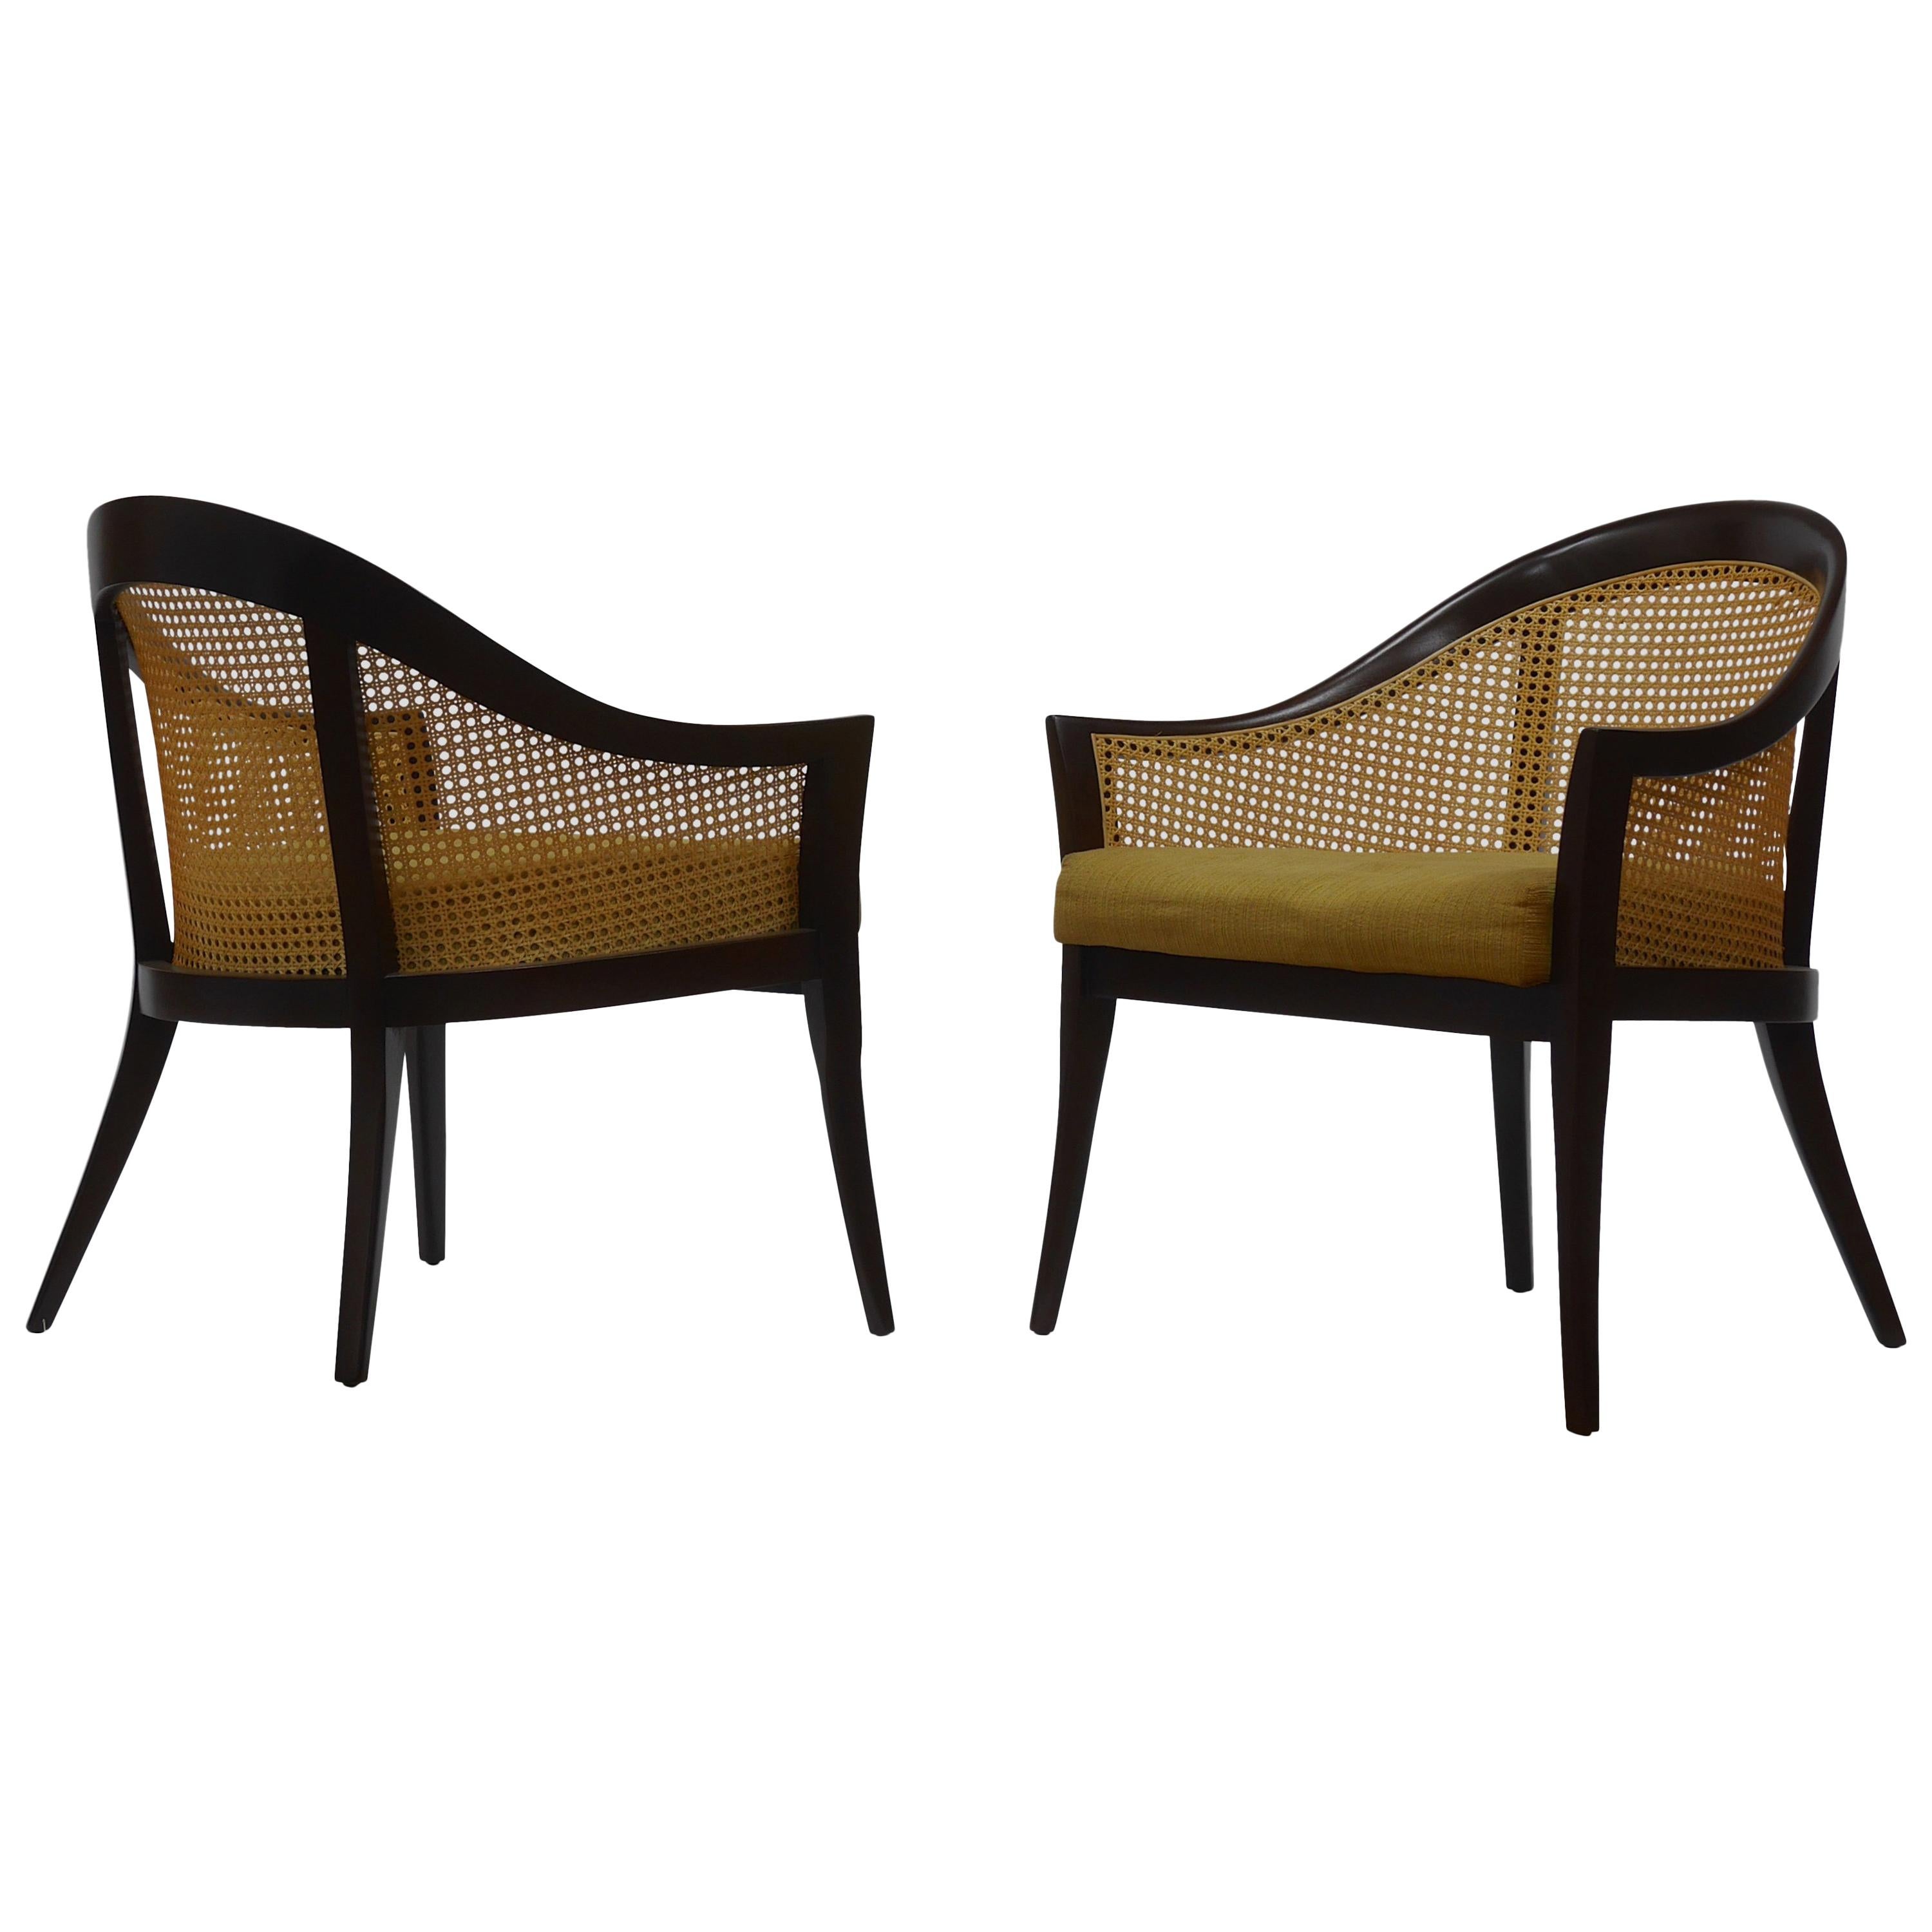 Elegant Lounge Chairs in Cane and Mahogany by Harvey Probber